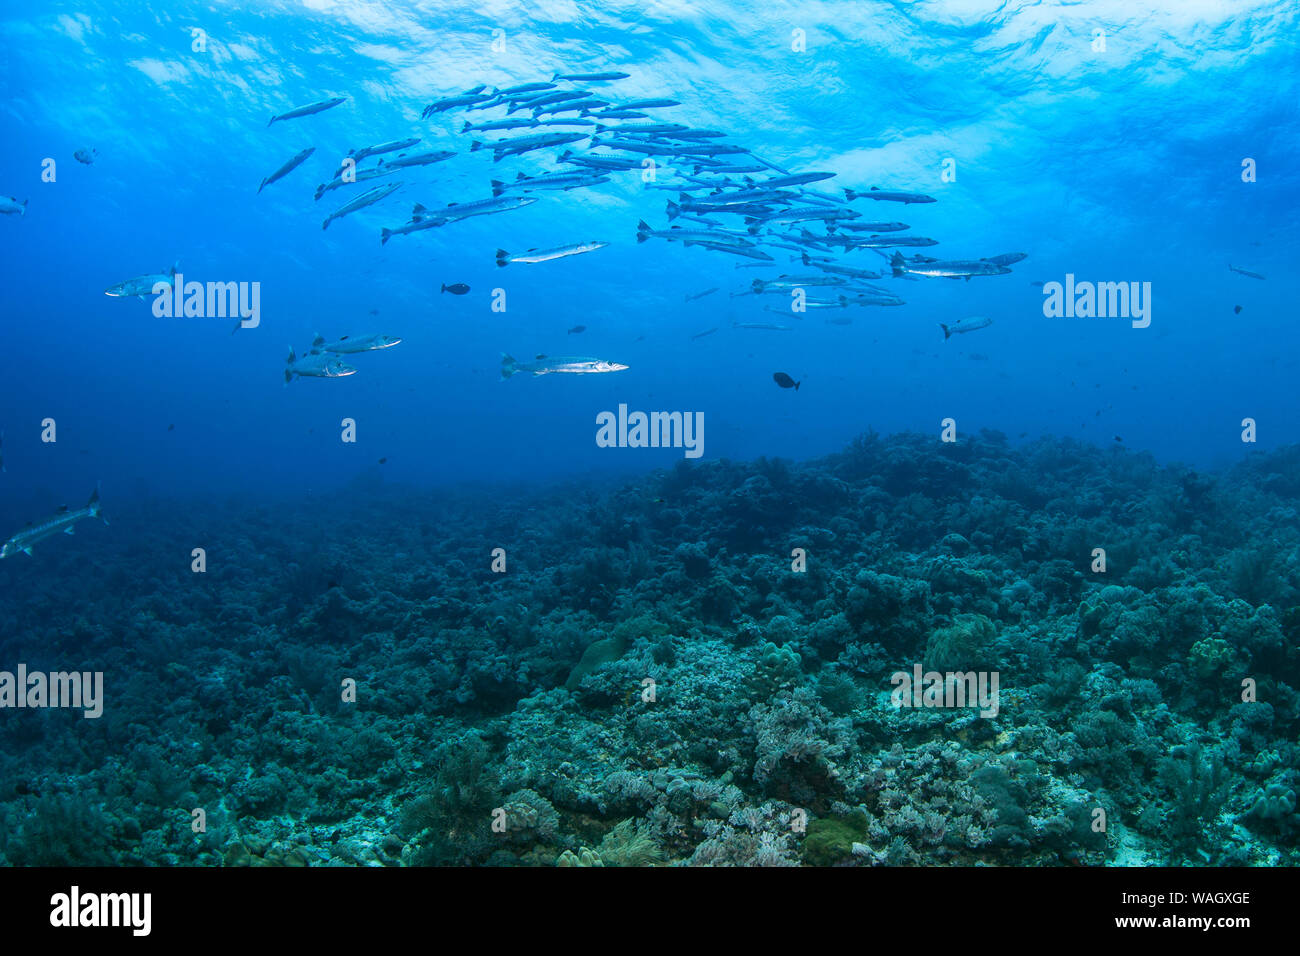 School of Great Barracuda (Sphyraena barracuda) in the deep blue of the South China Sea. Stock Photo